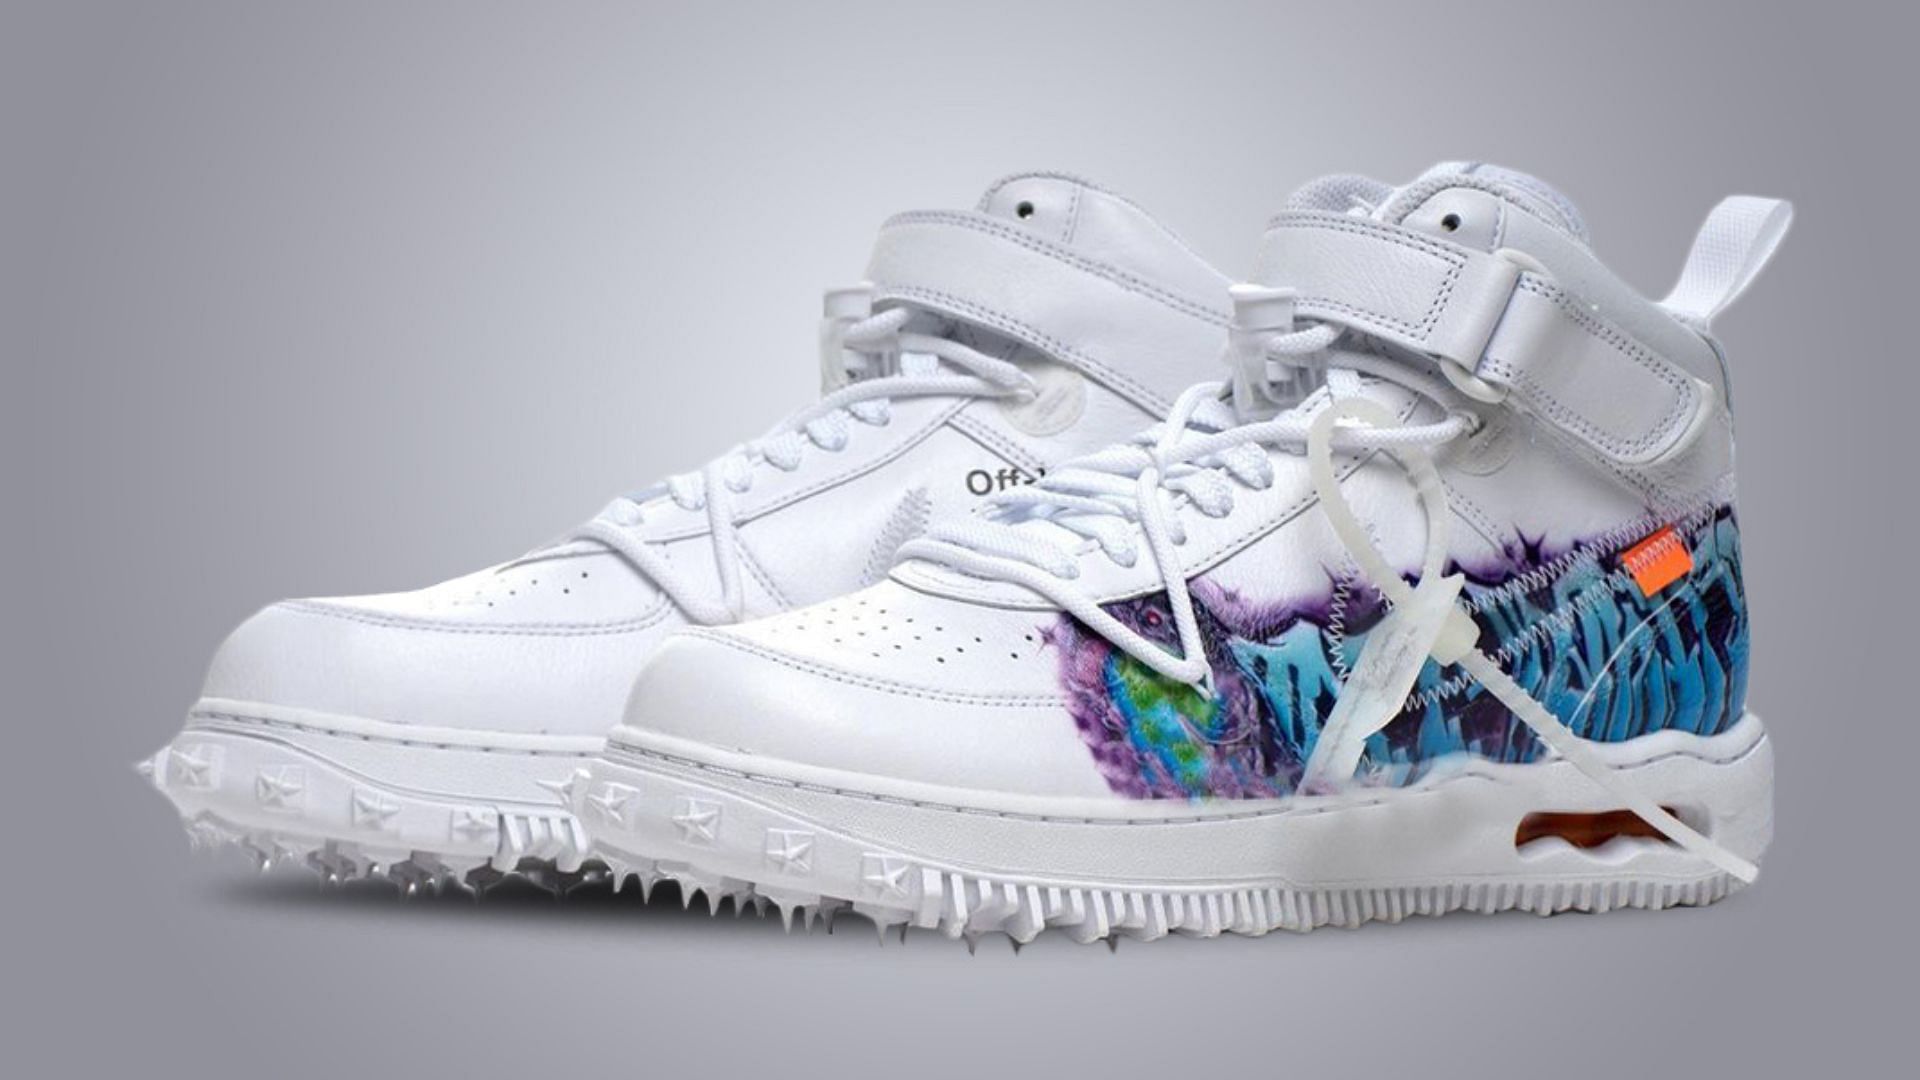 Where air force one experimental to buy Off-White x Nike Air Force 1 Mid “Graffiti” shoes